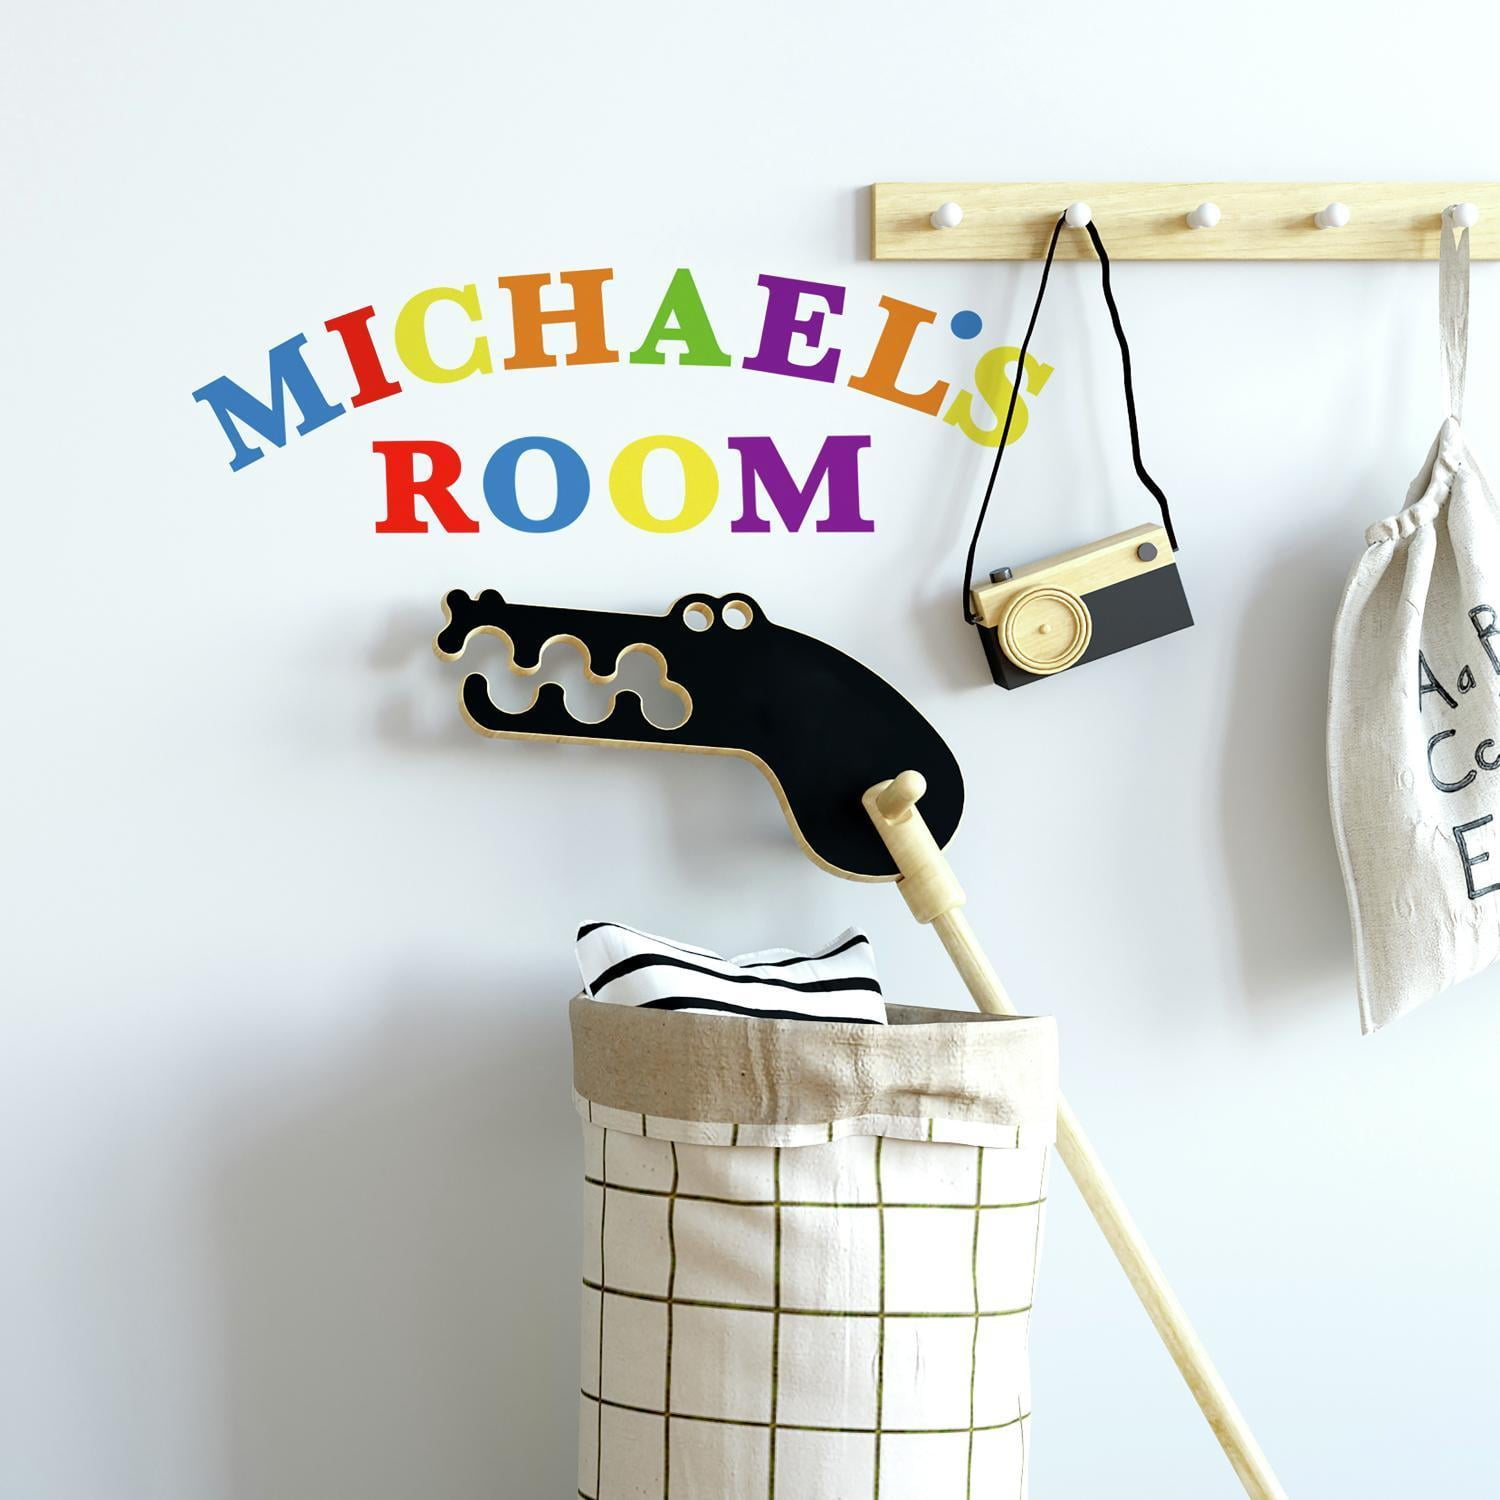 Personalized Kids Name for Bedroom Walls Kids Name Wall Stickers Decorative white Wooden Letters for Nursery & Kids Room price is per letter a-z. Kids Name Wall Letters